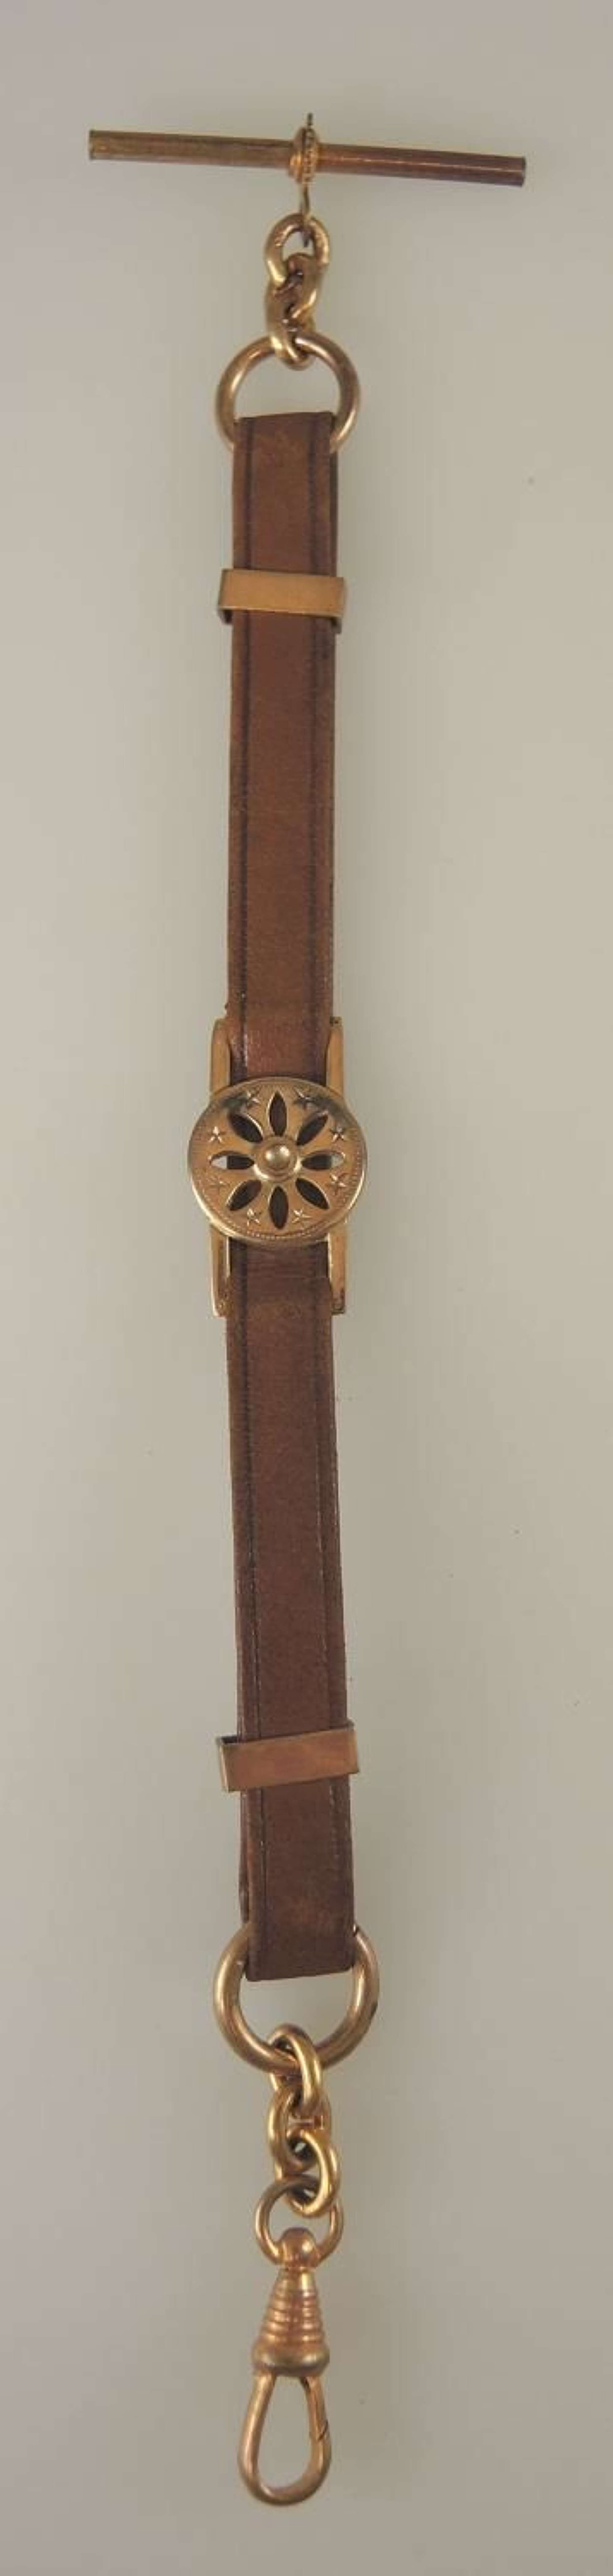 Unusual Fancy Gilt and leather watch guard c1890